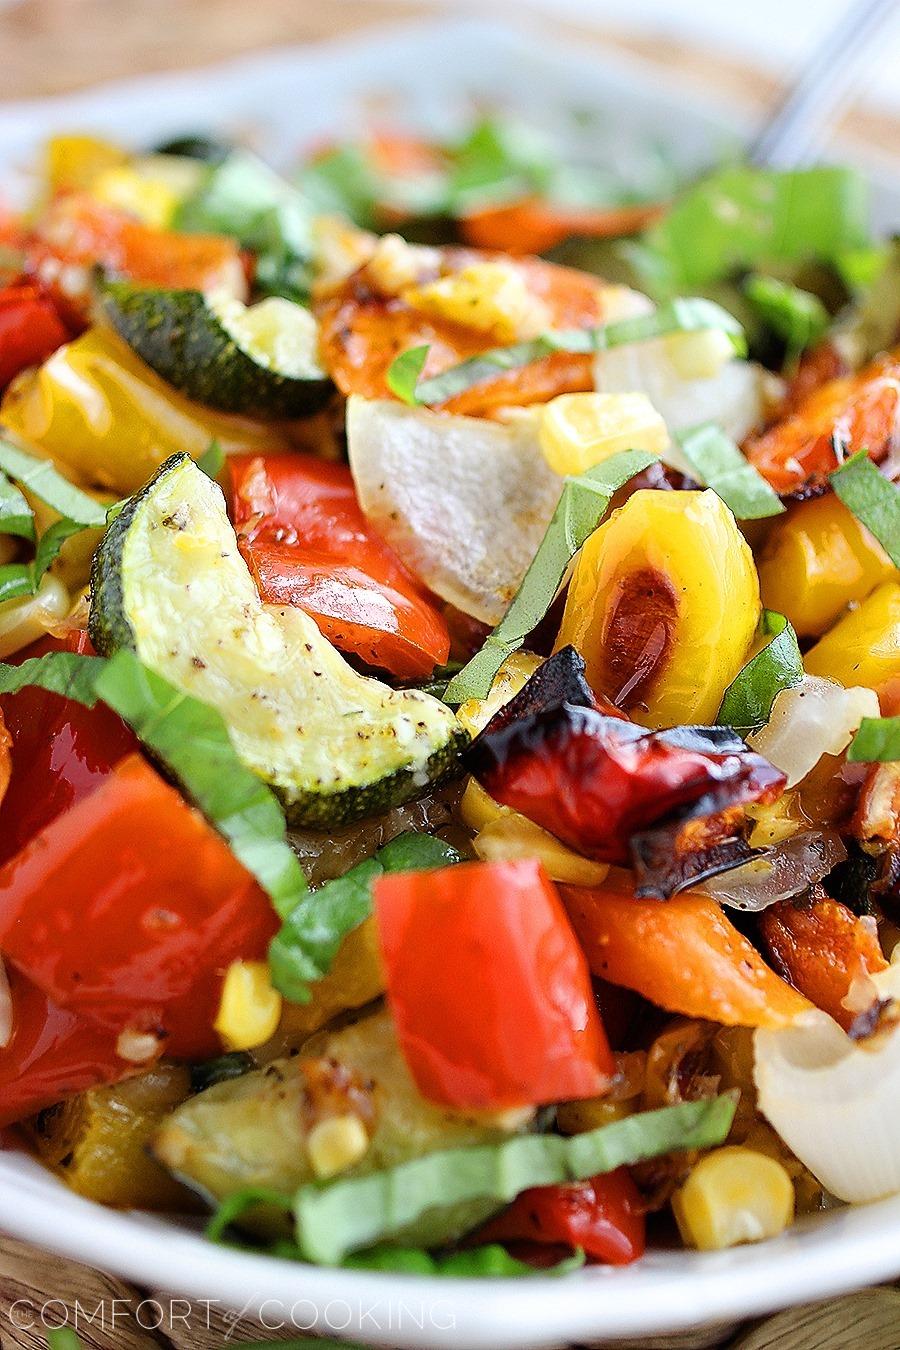 Easy Roasted Summer Vegetables – For a light, healthy dish with vibrant colors & flavors, roast summer veggies with this easy method!| thecomfortofcooking.com